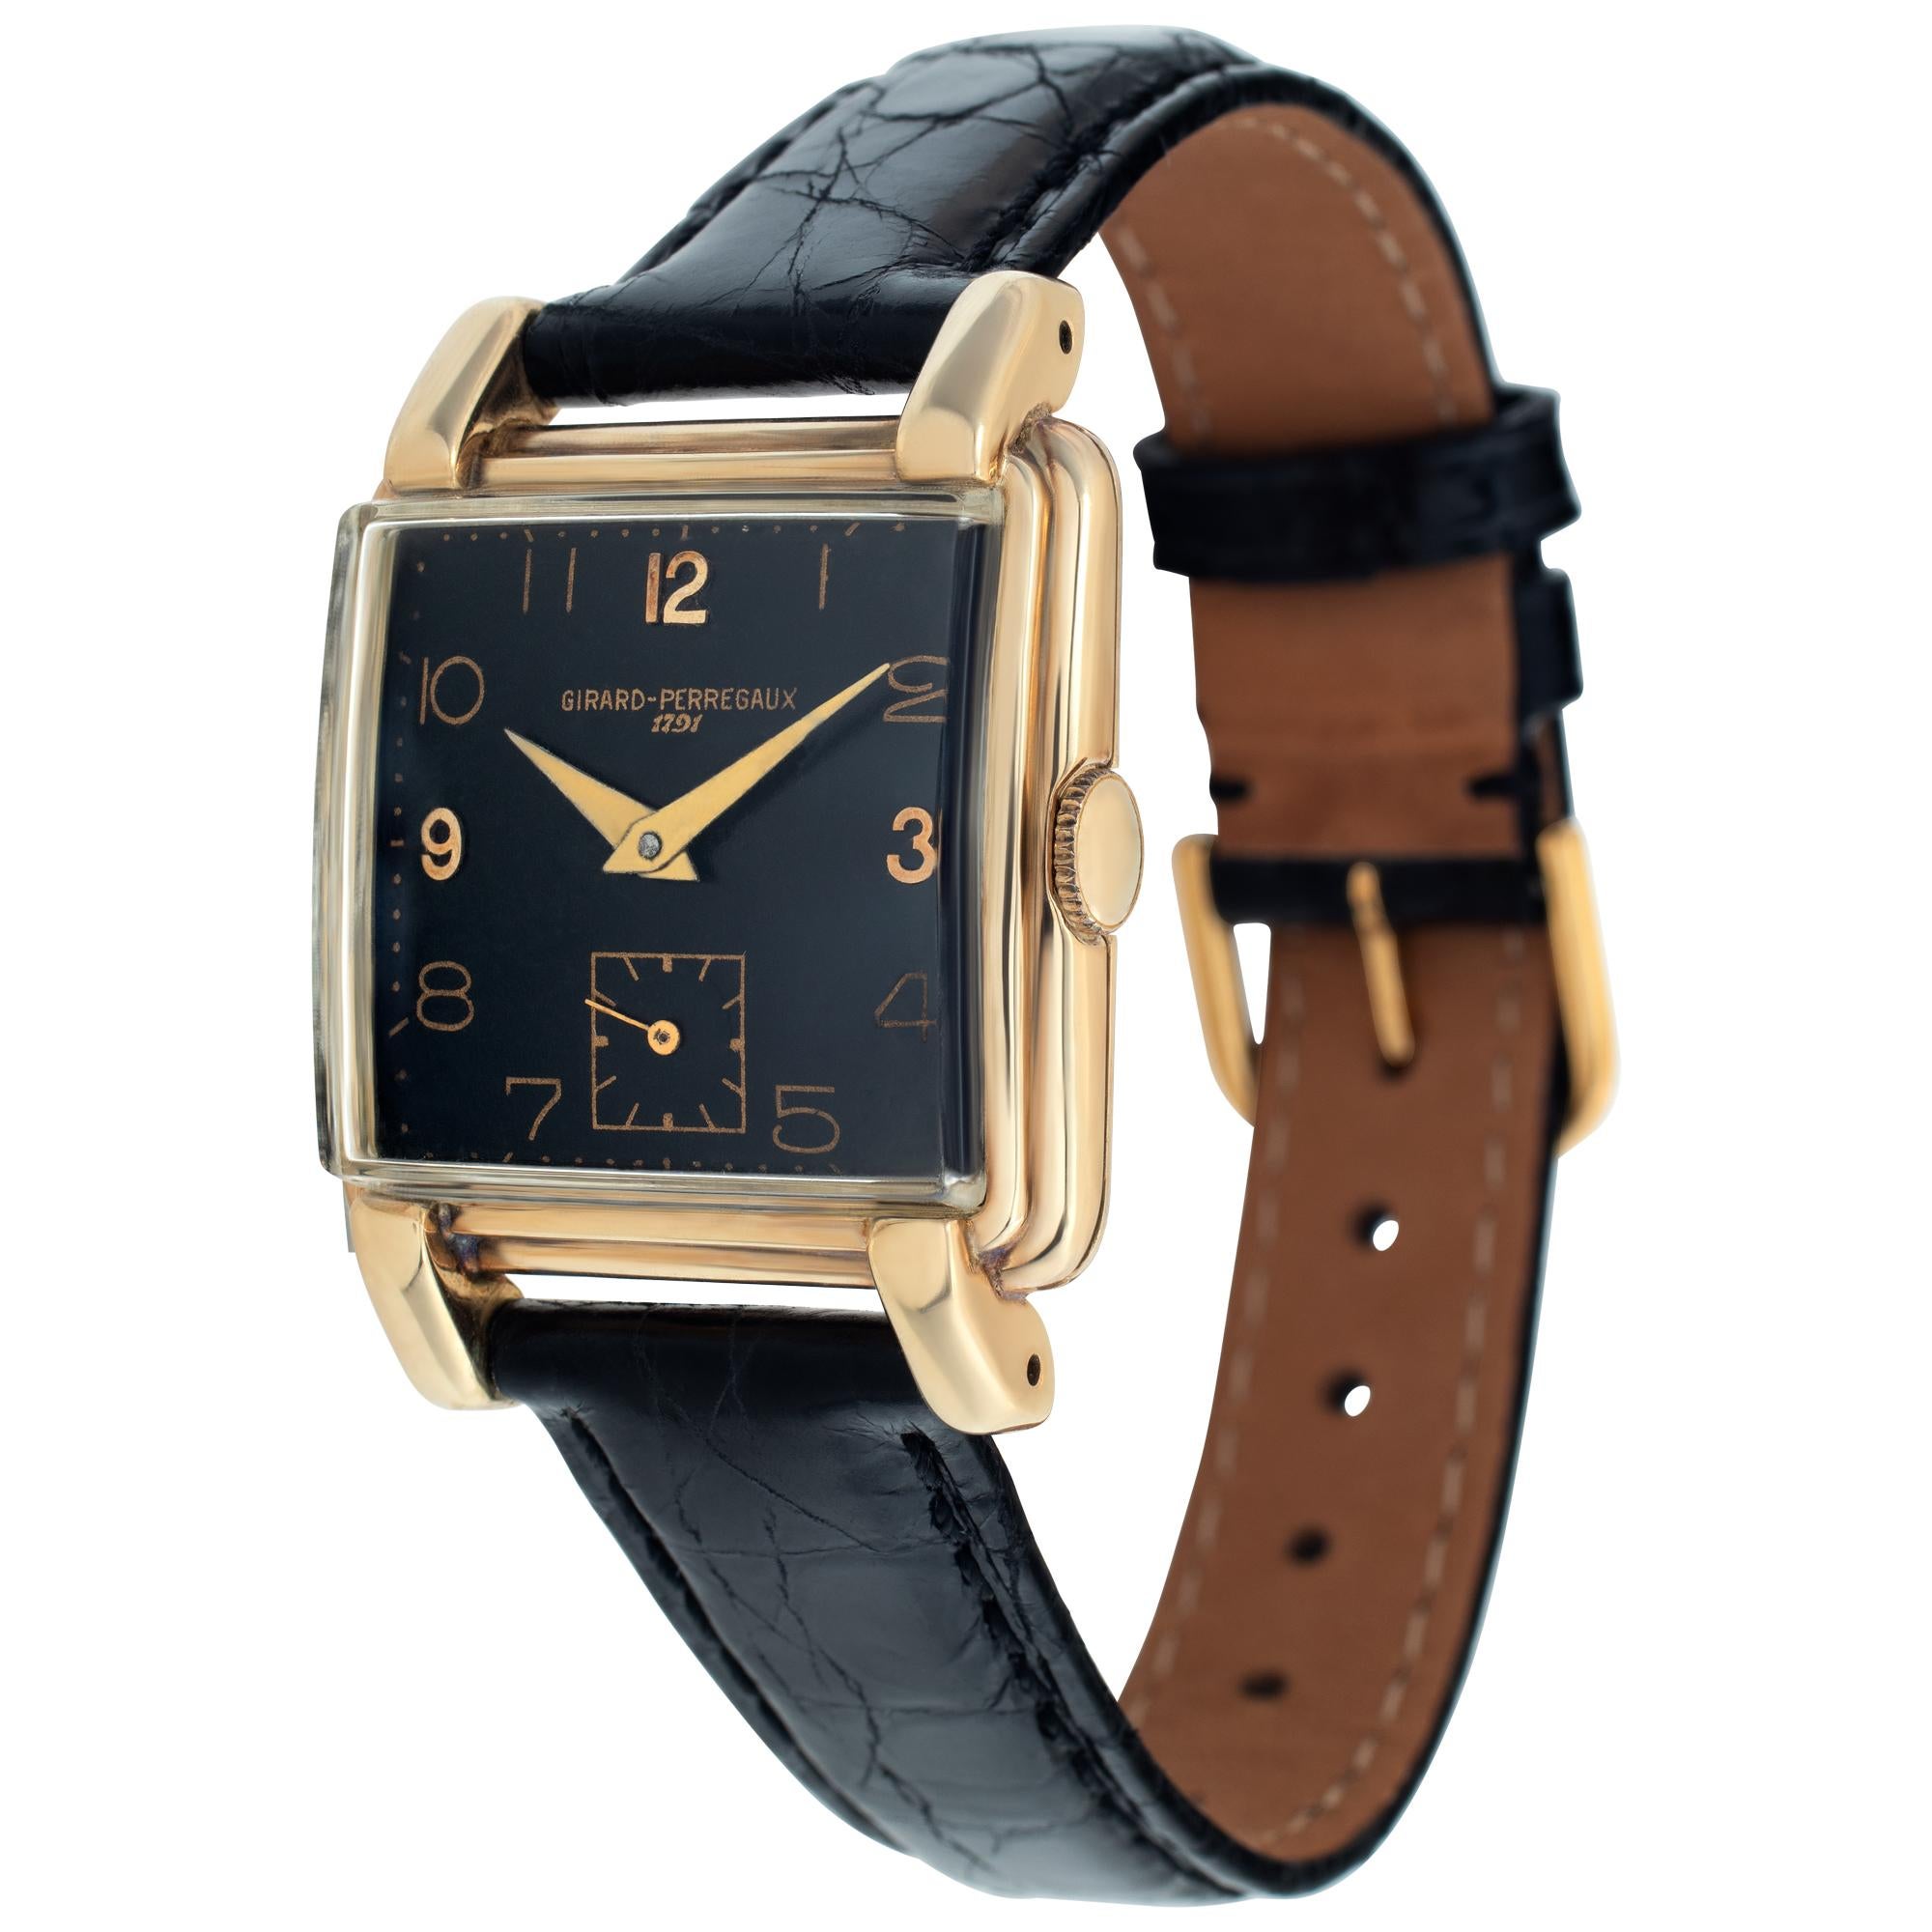 Vintage Girard Perregaux in 14k yellow gold with black dial on black crocodile strap. Square case with lobed lugs. Manual wind with sub-seconds. 28 mm case size. Circa 1950s. Fine Pre-owned Girard Perregaux Watch. Certified preowned Vintage Girard